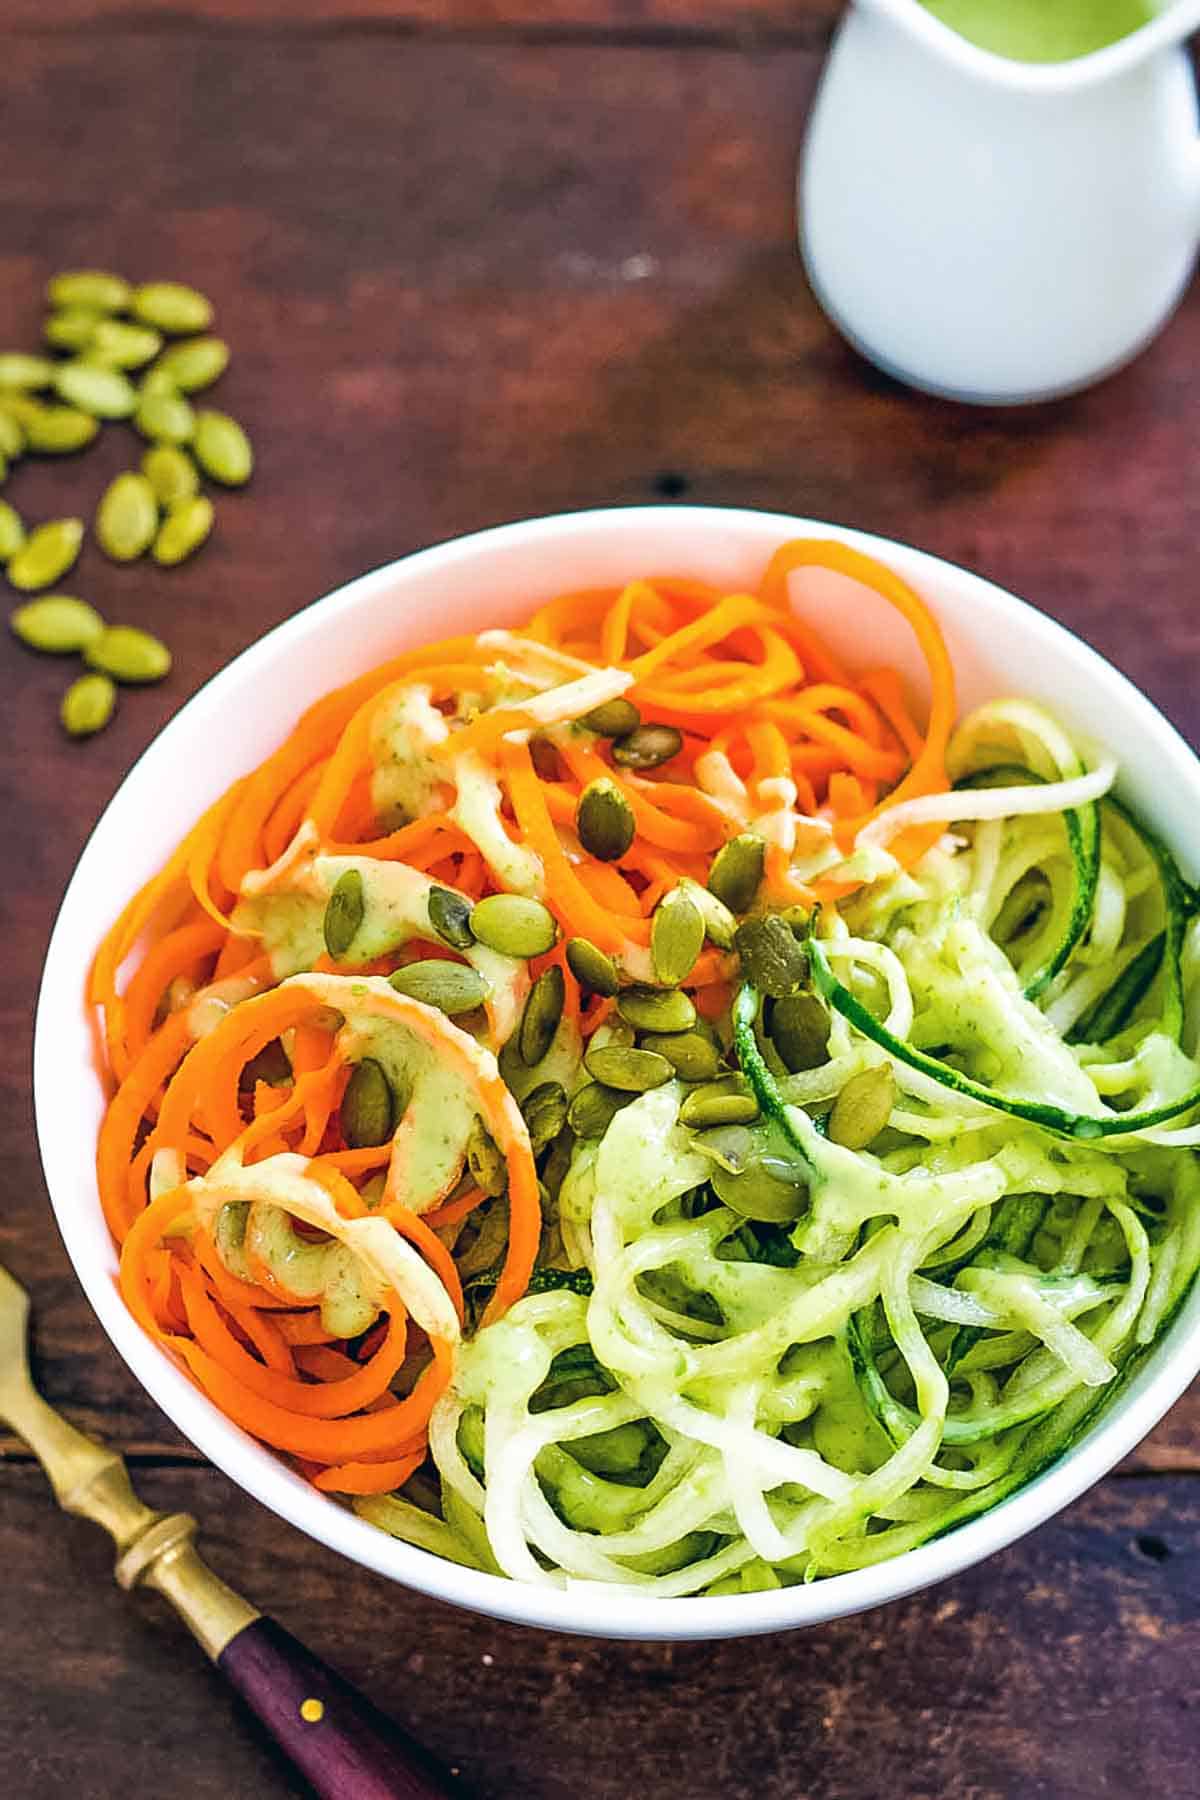 Spiralized Cucumber Carrot Salad with avocado dressing on the side